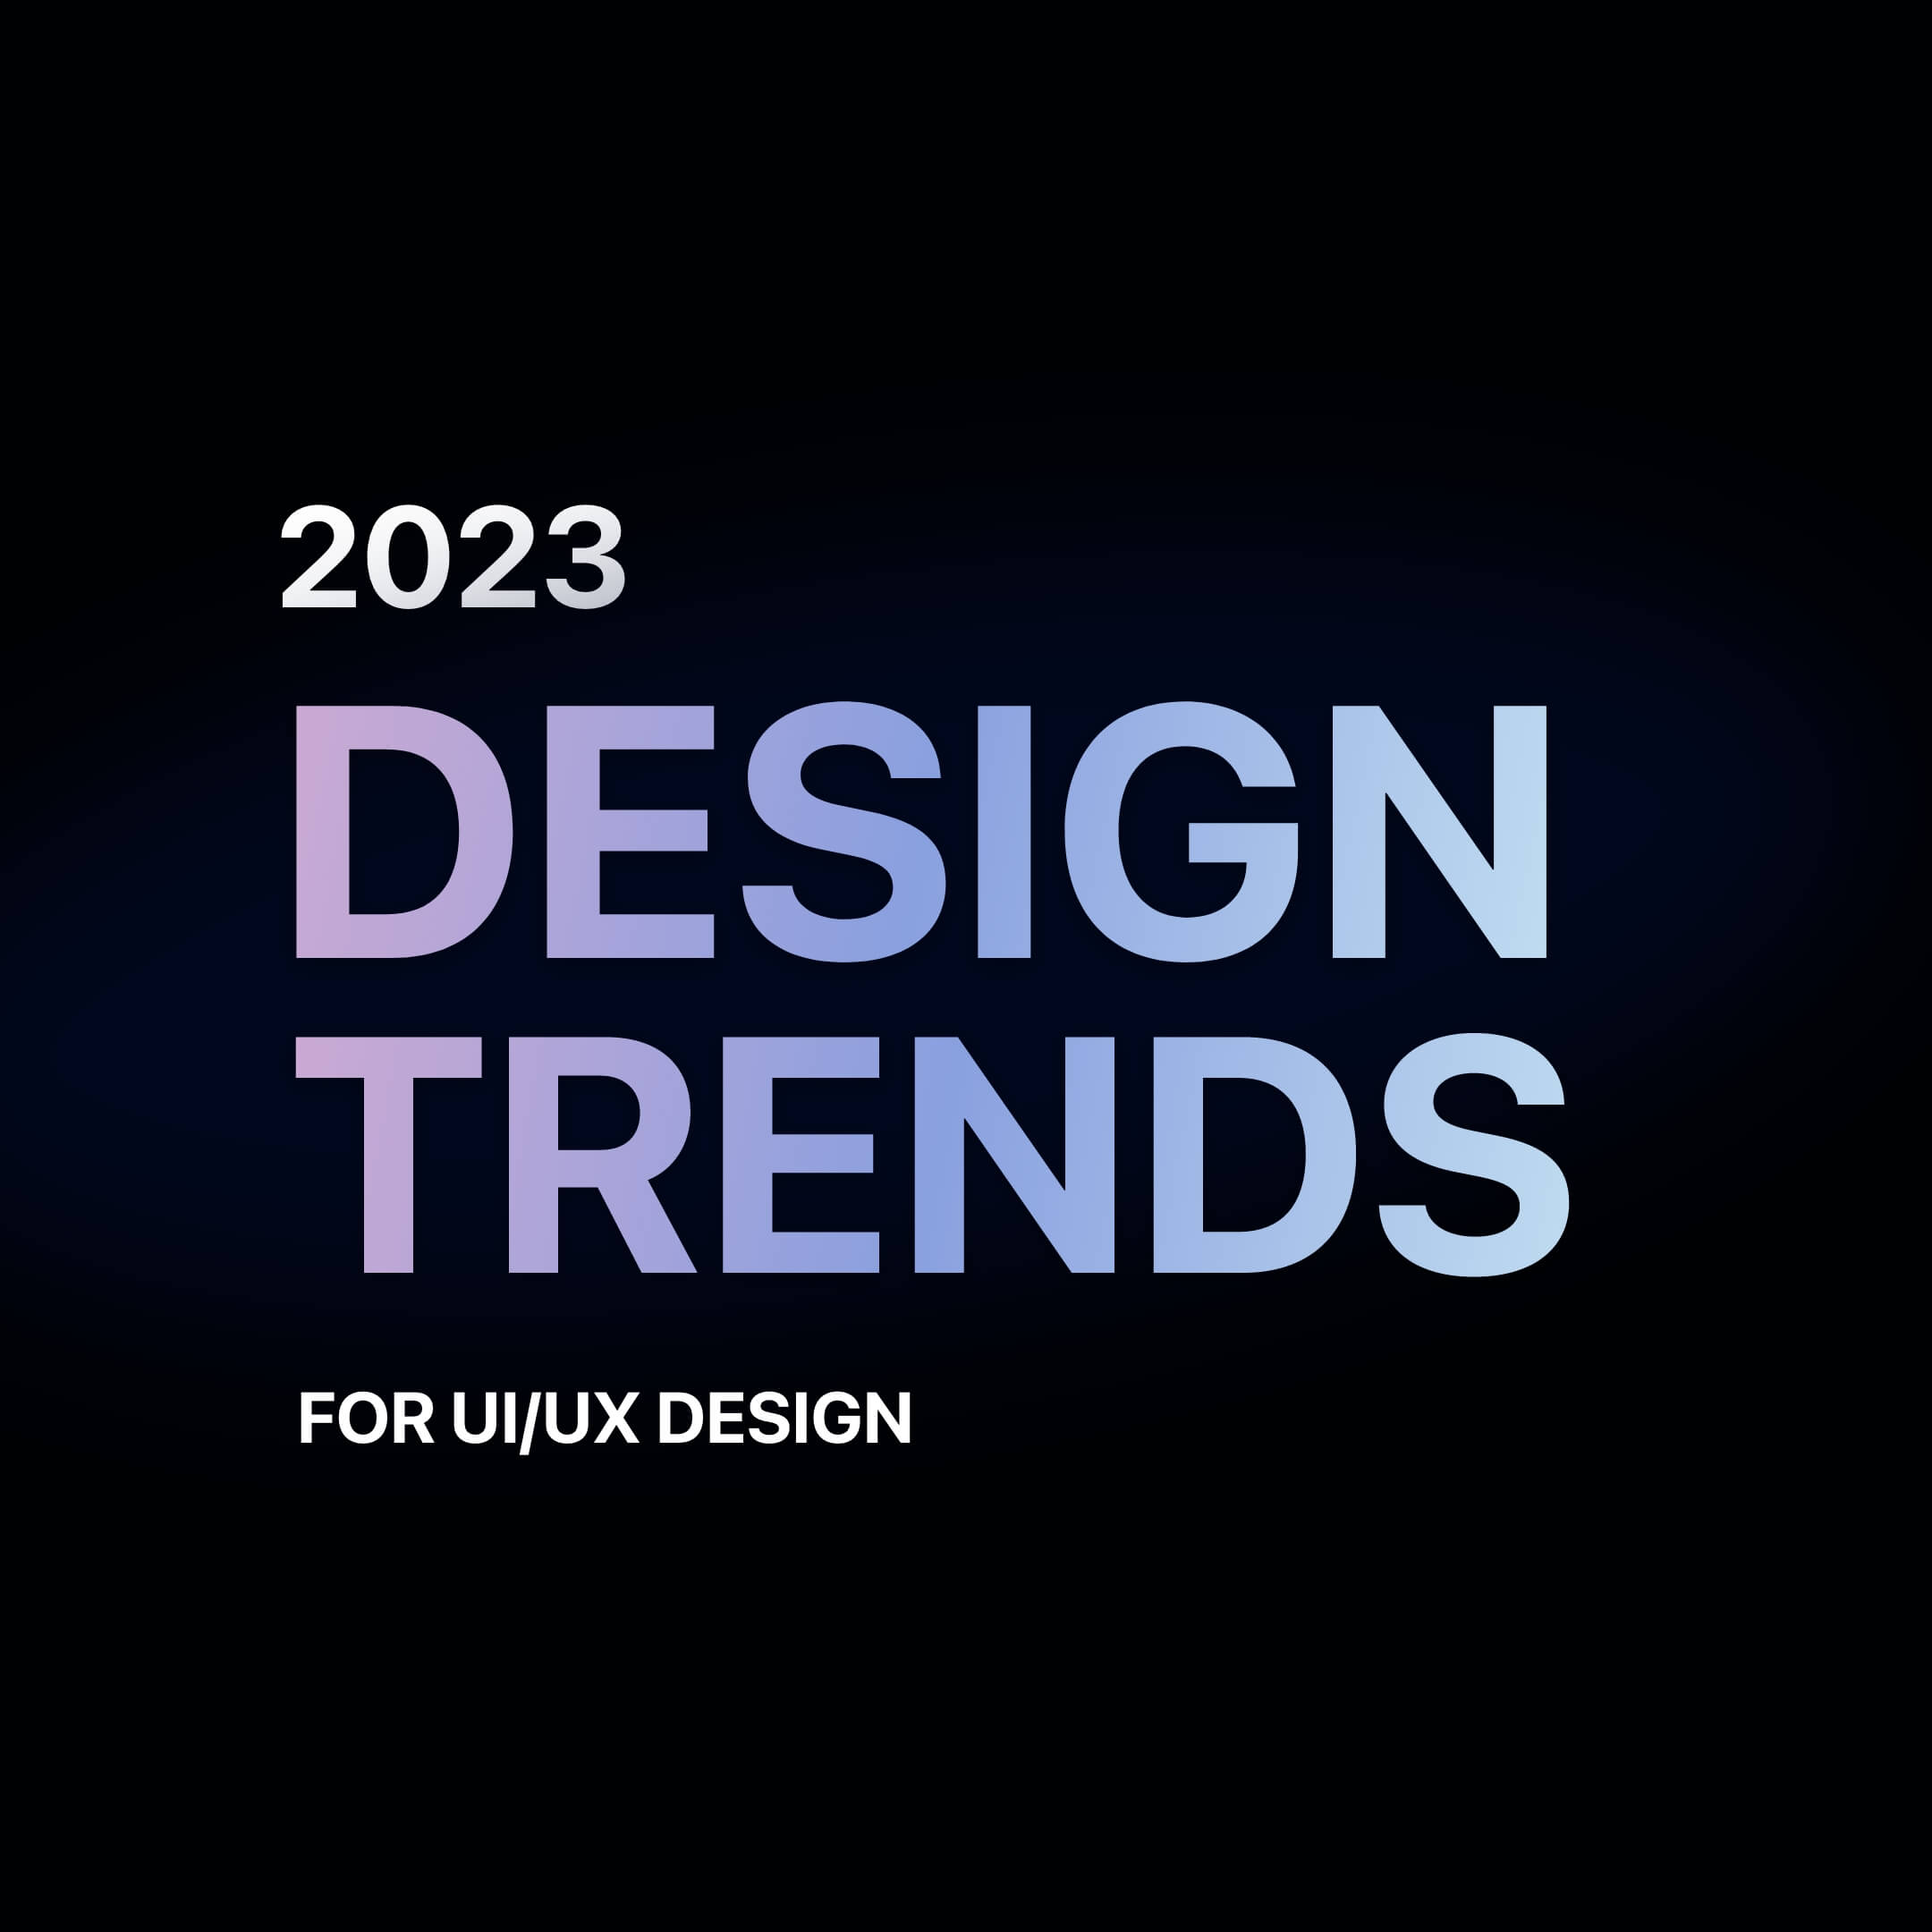 What design trends can we expect to see in 2023?